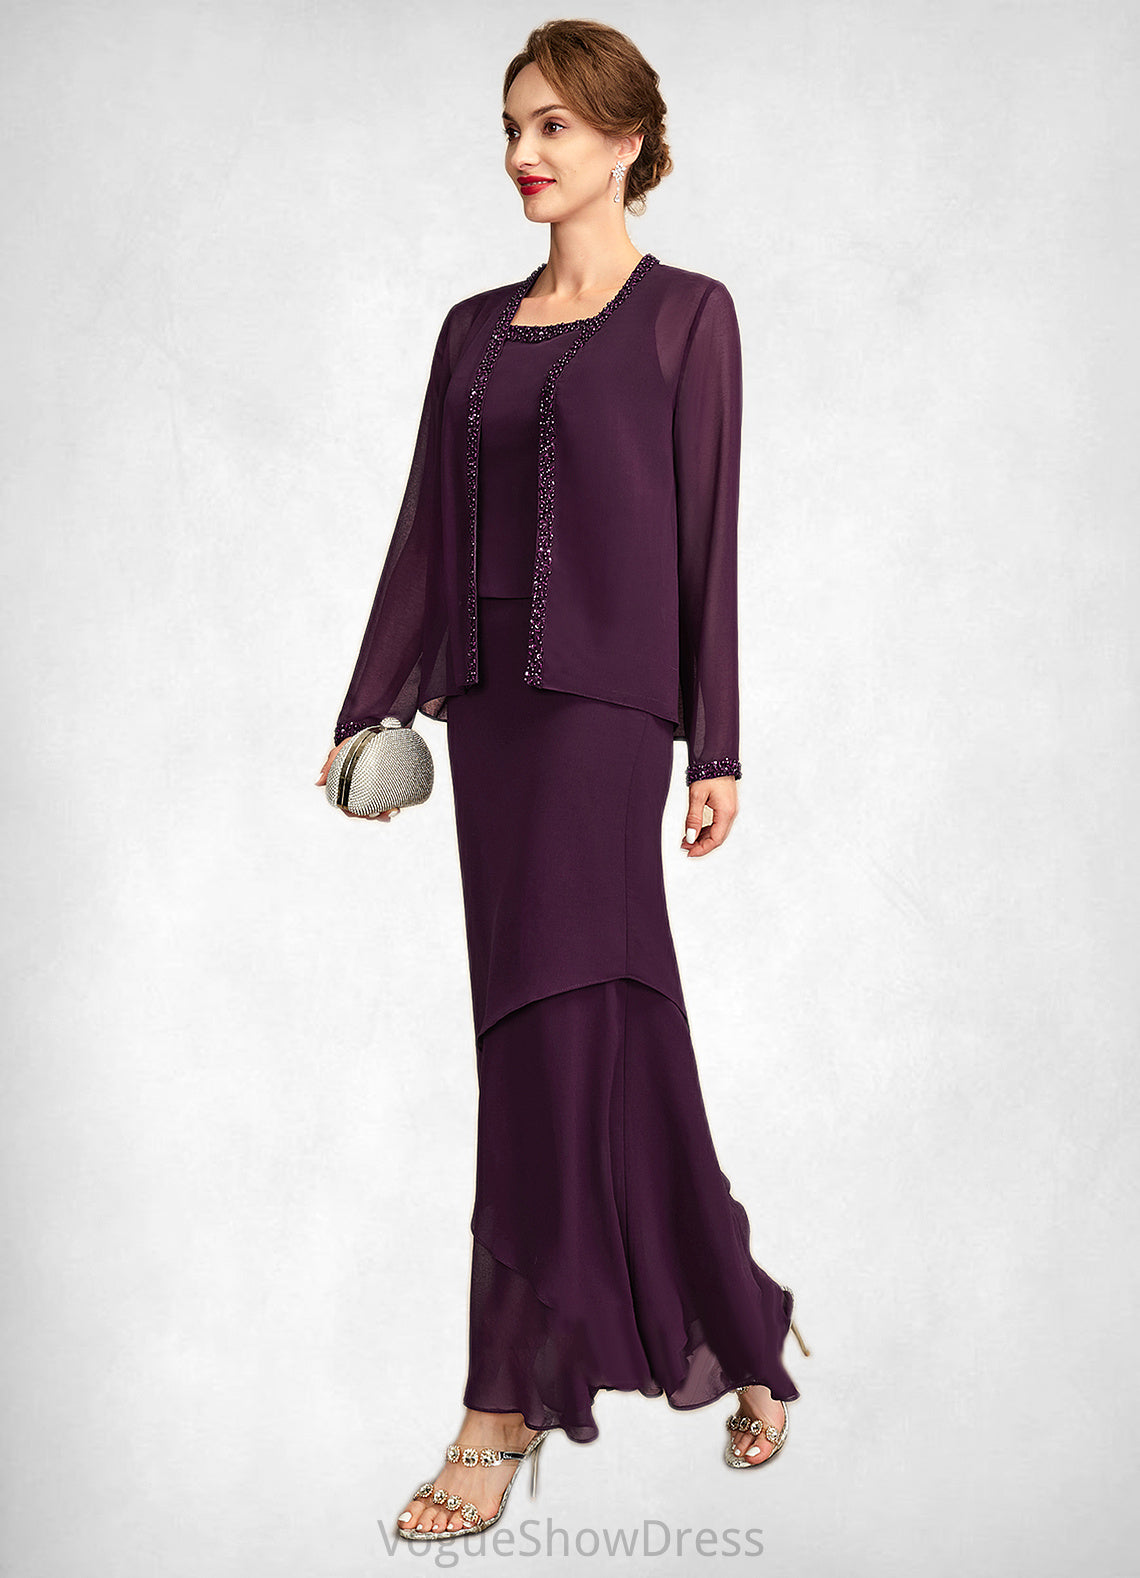 Kylie Sheath/Column Scoop Neck Ankle-Length Chiffon Mother of the Bride Dress With Beading Sequins DL126P0015024